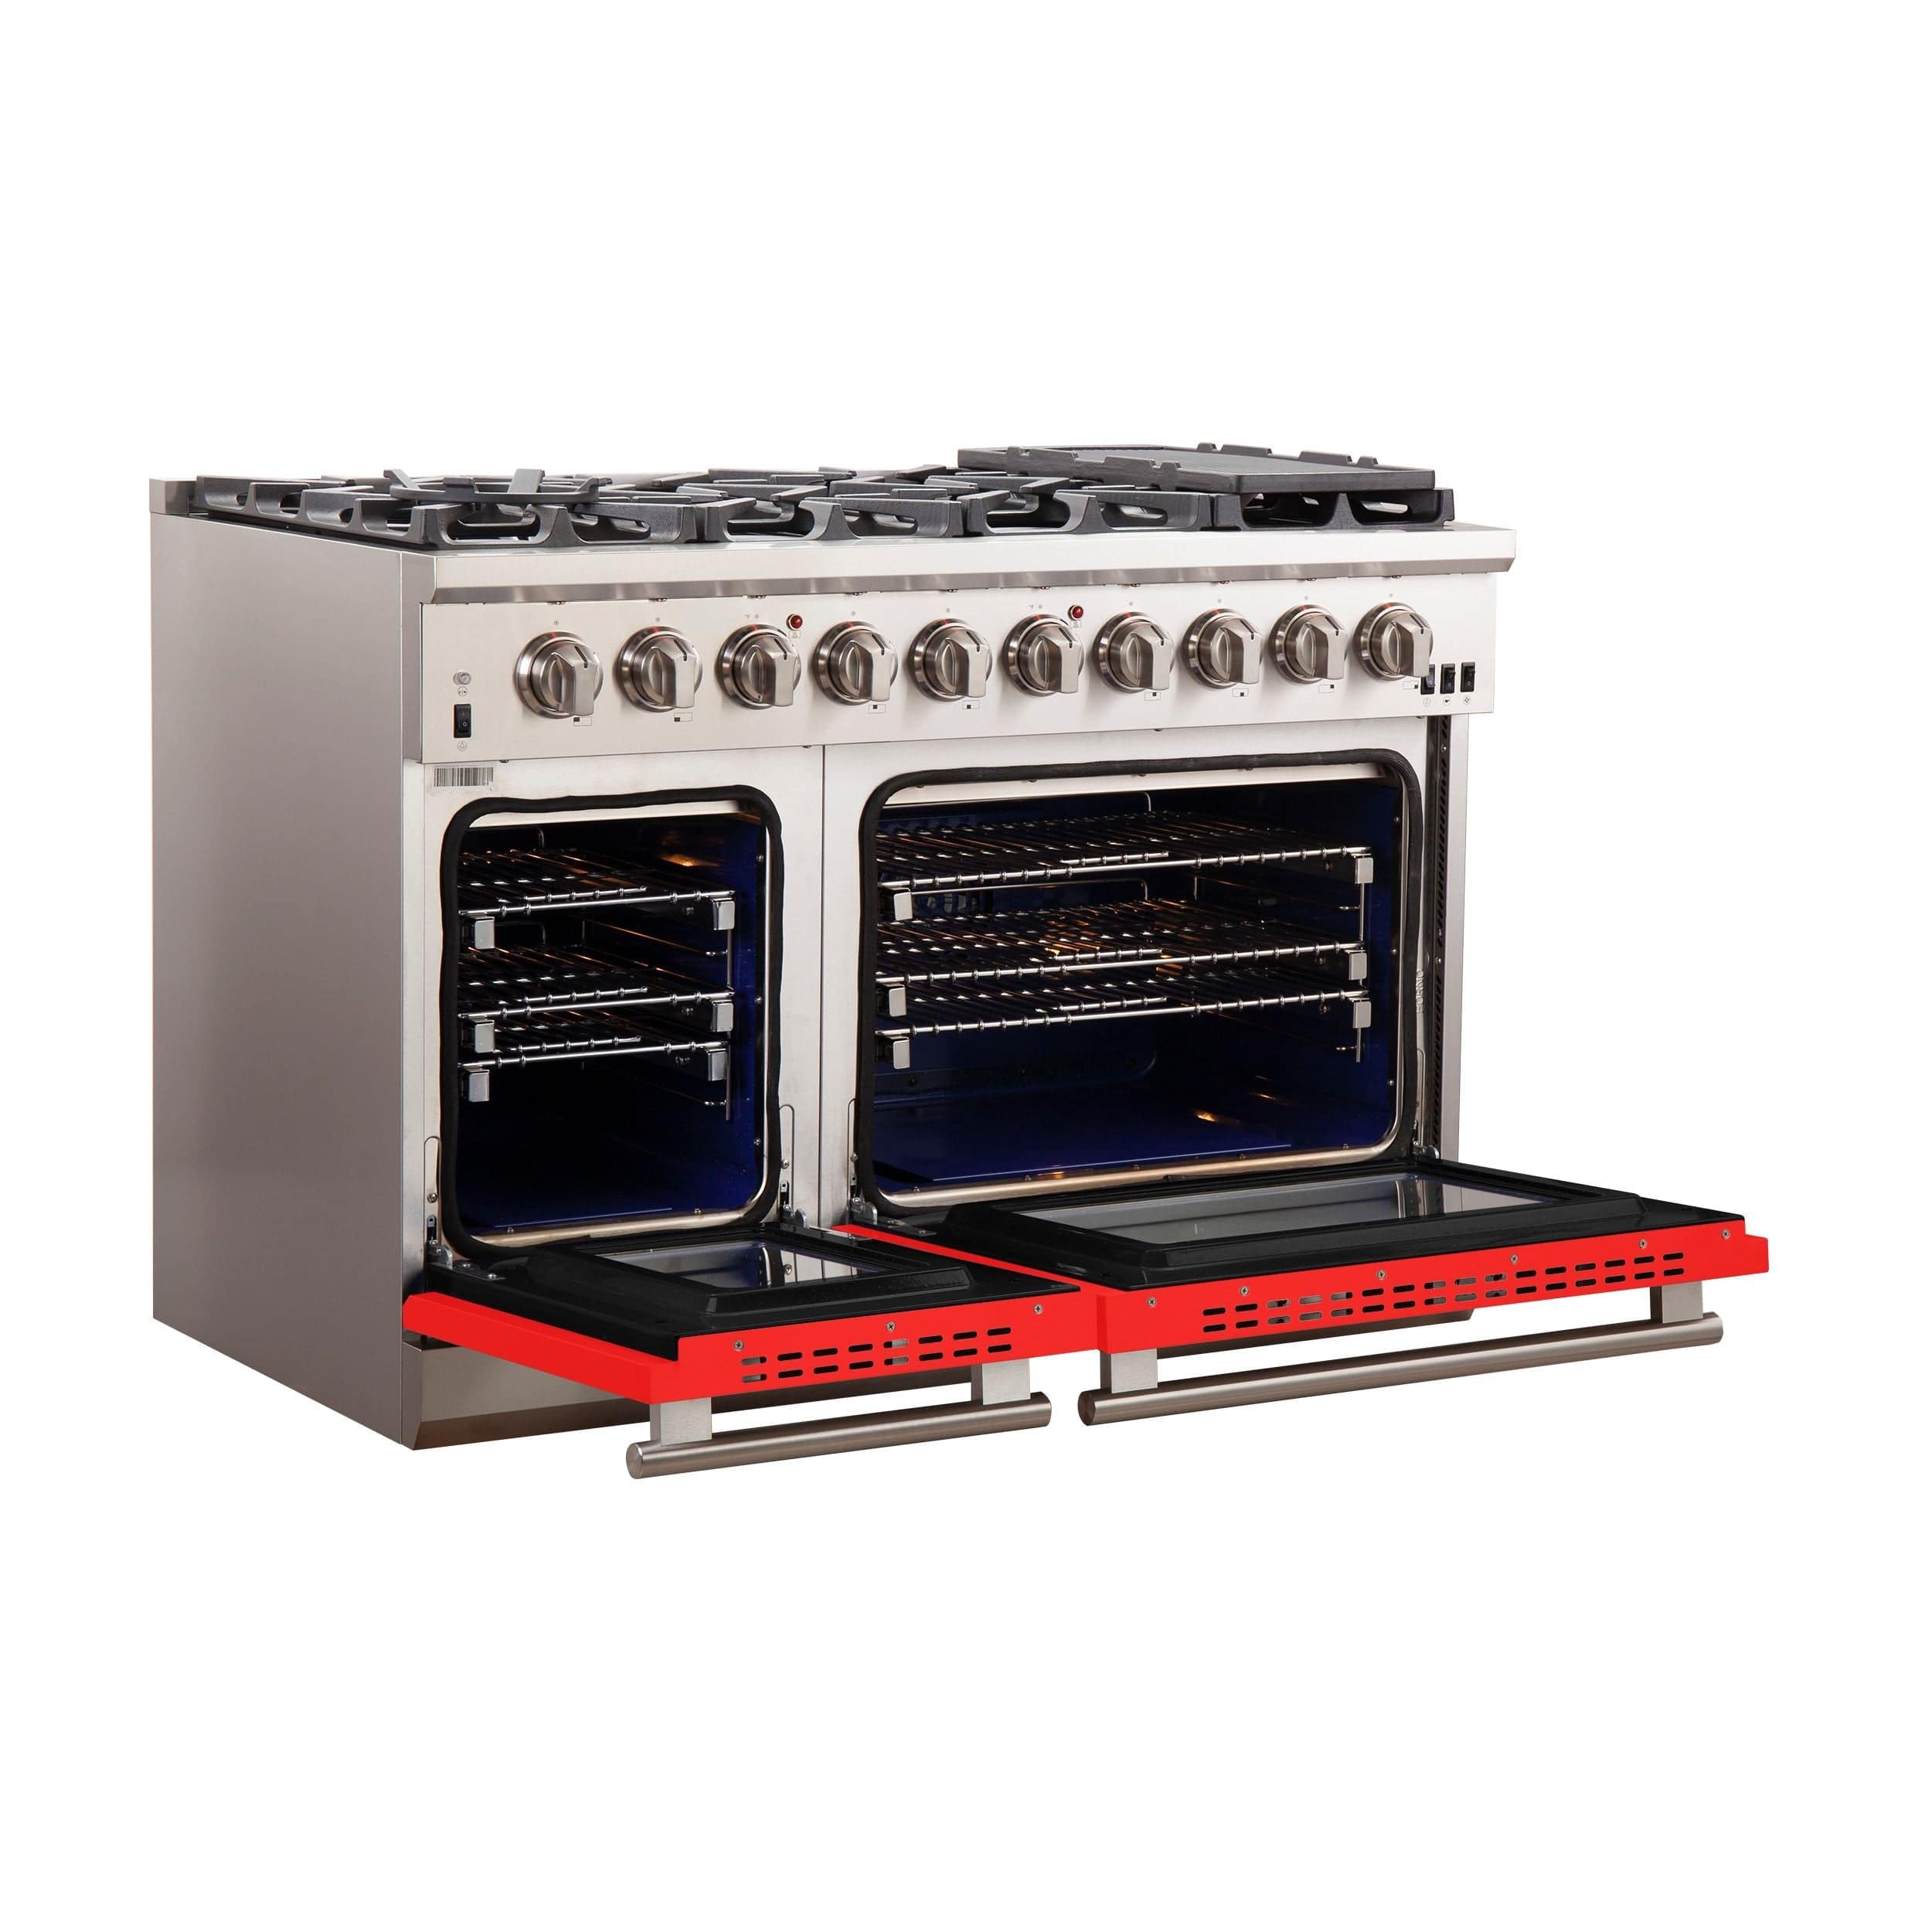 Forno 48 Inch Professional Freestanding Gas Range in Red, FFSGS6260-48RED Range FFSGS6260-48RED Luxury Appliances Direct